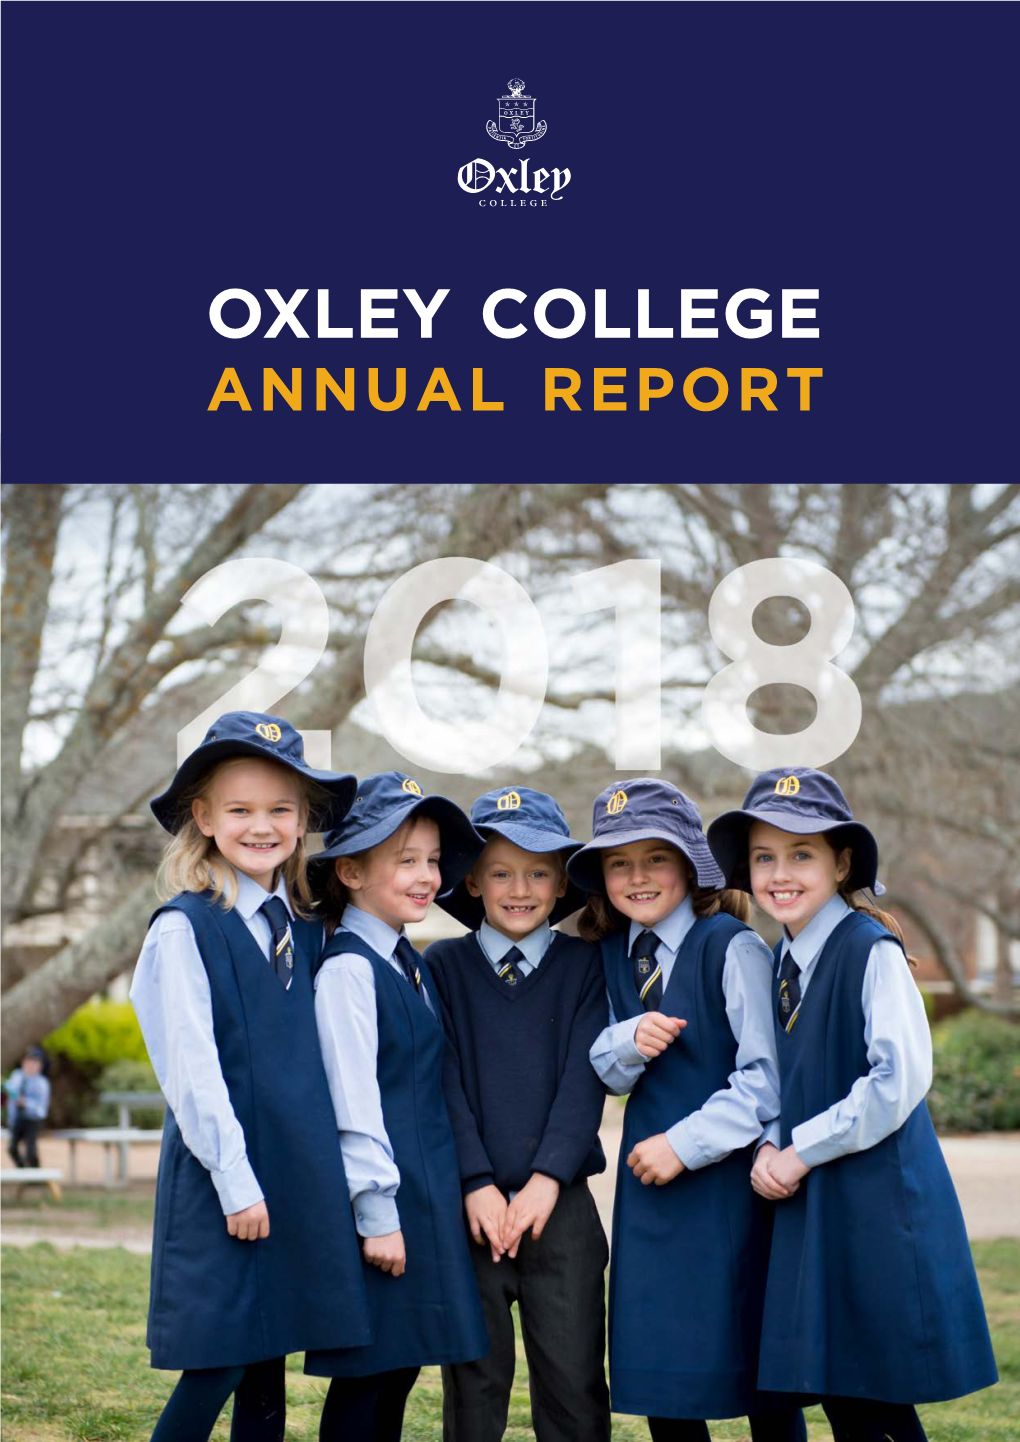 Oxley College Annual Report